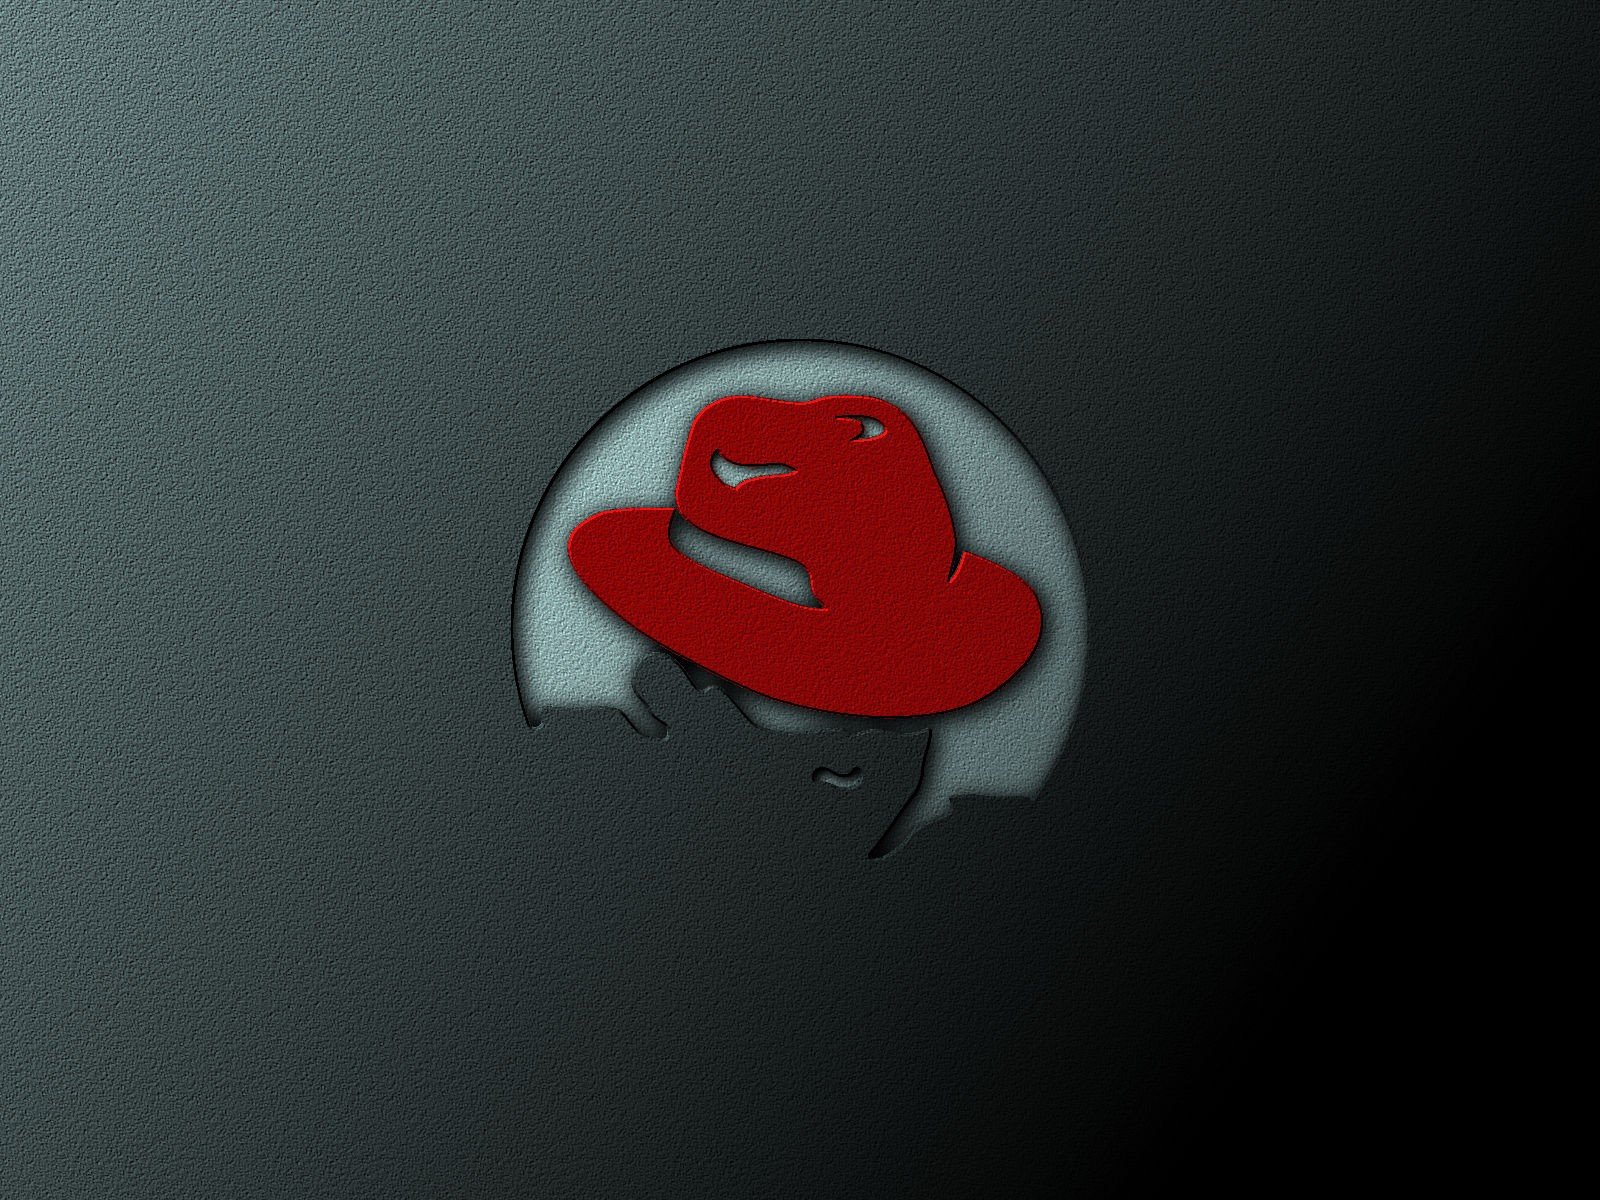 Linux, Red Hat Wallpaper